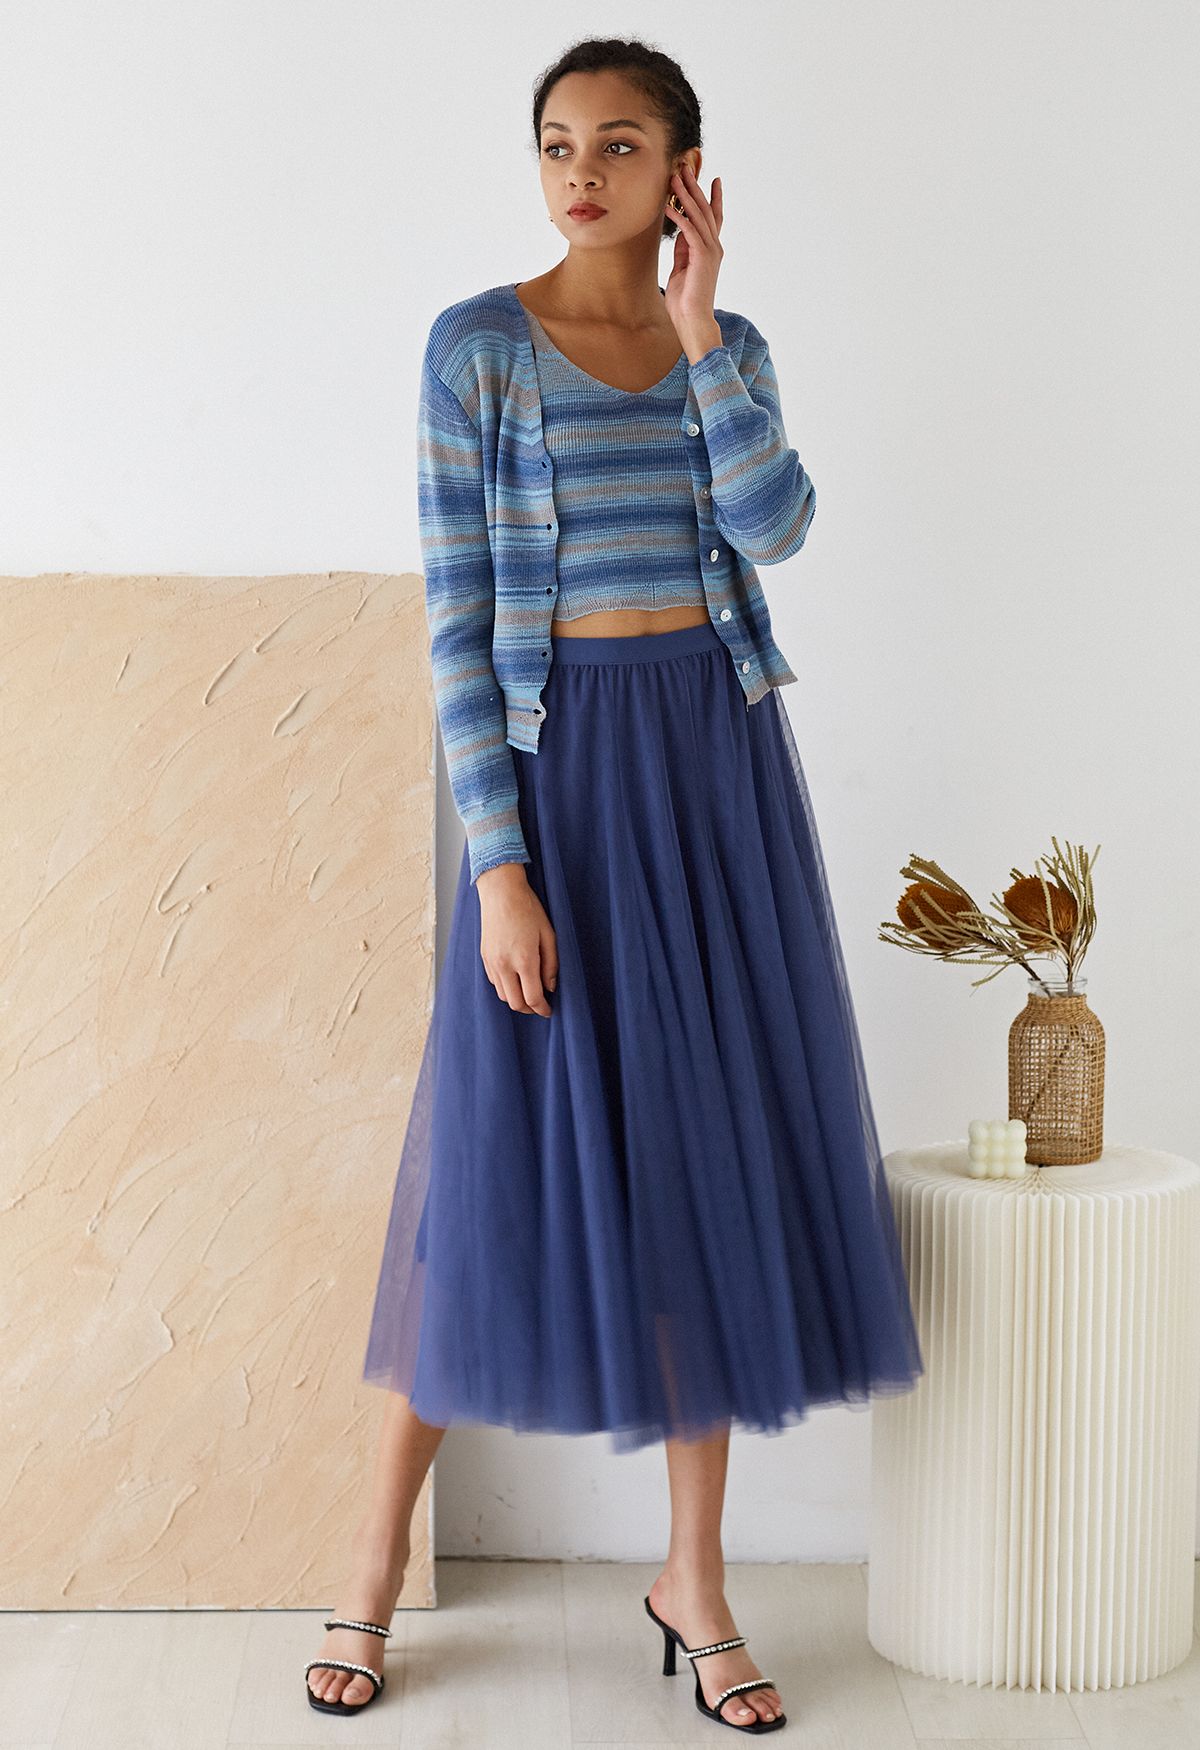 Mixcolor Striped Cami Crop Top and Cardigan Set in Blue